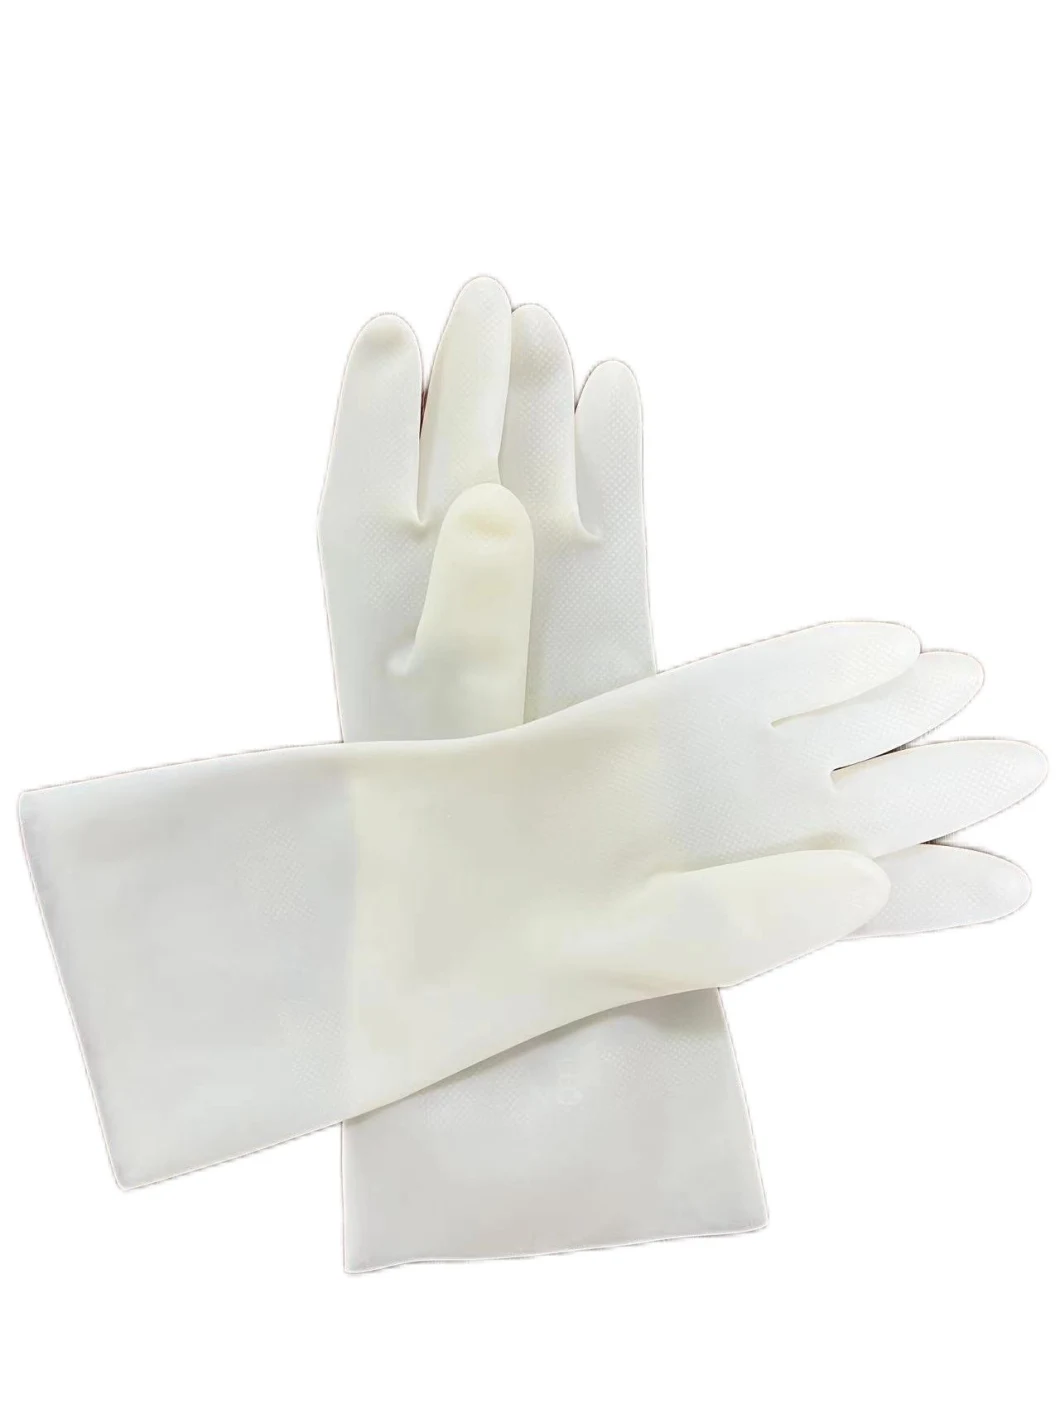 White Xinyue Manufacturer Food Grade Nitrile Gloves Strong Abrasion Resistant